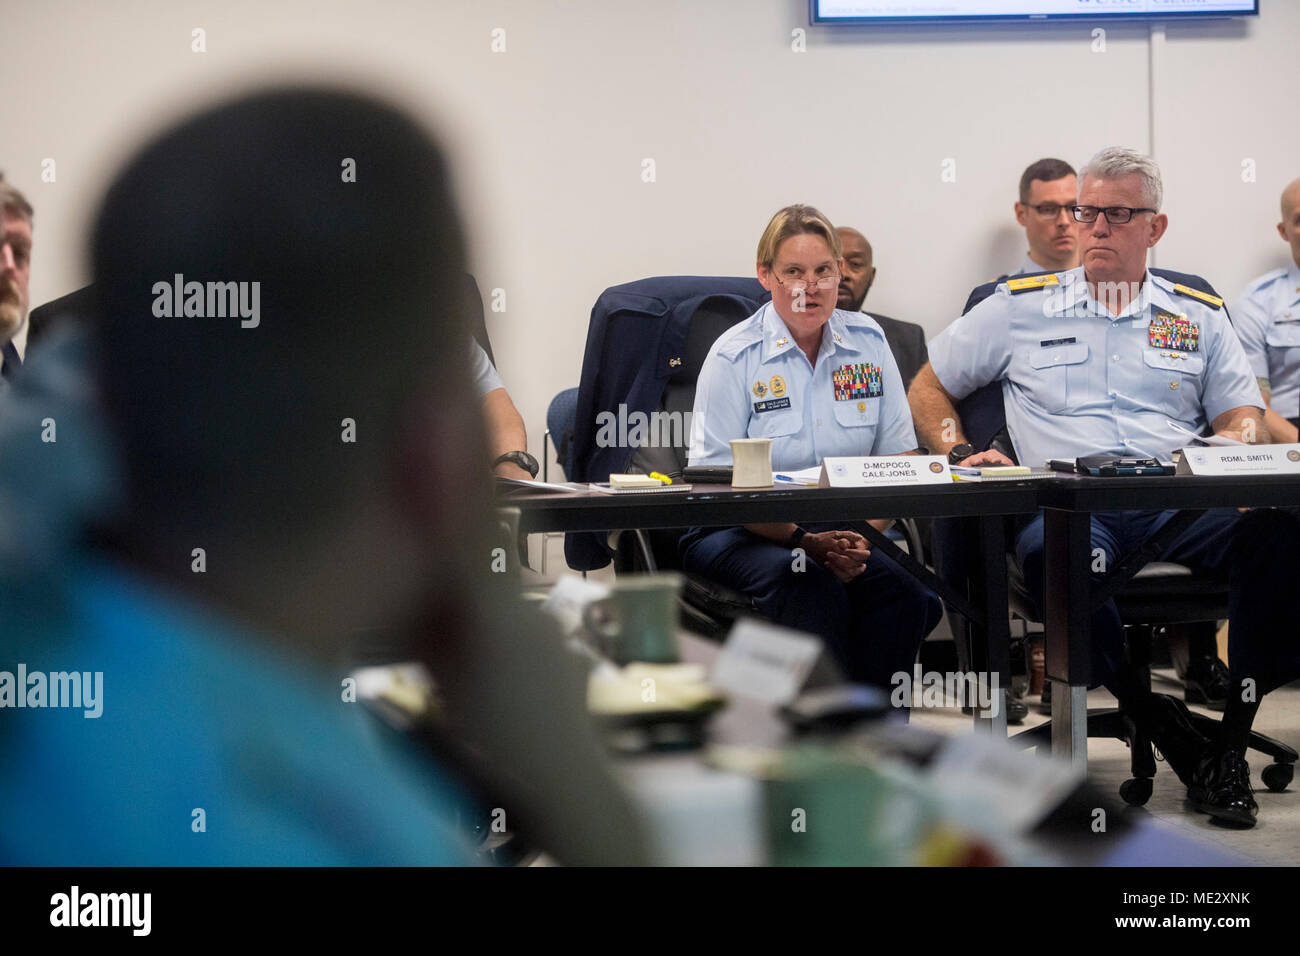 Master Chief Leilani L. Cale-Jones, Deputy Master Chief Petty Officer of the Coast Guard, and Rear Adm. Keith Smith, commander of Coast Guard Force Readiness Command, makes comments during a Board of Advisors Meeting, Thursday, Sept. 28, 2017. The board is holding its semi-annual meeting at the Coast Guard Training Center in Cape May, N.J., to discuss issues aimed at ensuring the best practices and policies are in place to ensure mission success. Official U.S. Coast Guard photos by Petty Officer 2nd Class Richard Brahm. Stock Photo